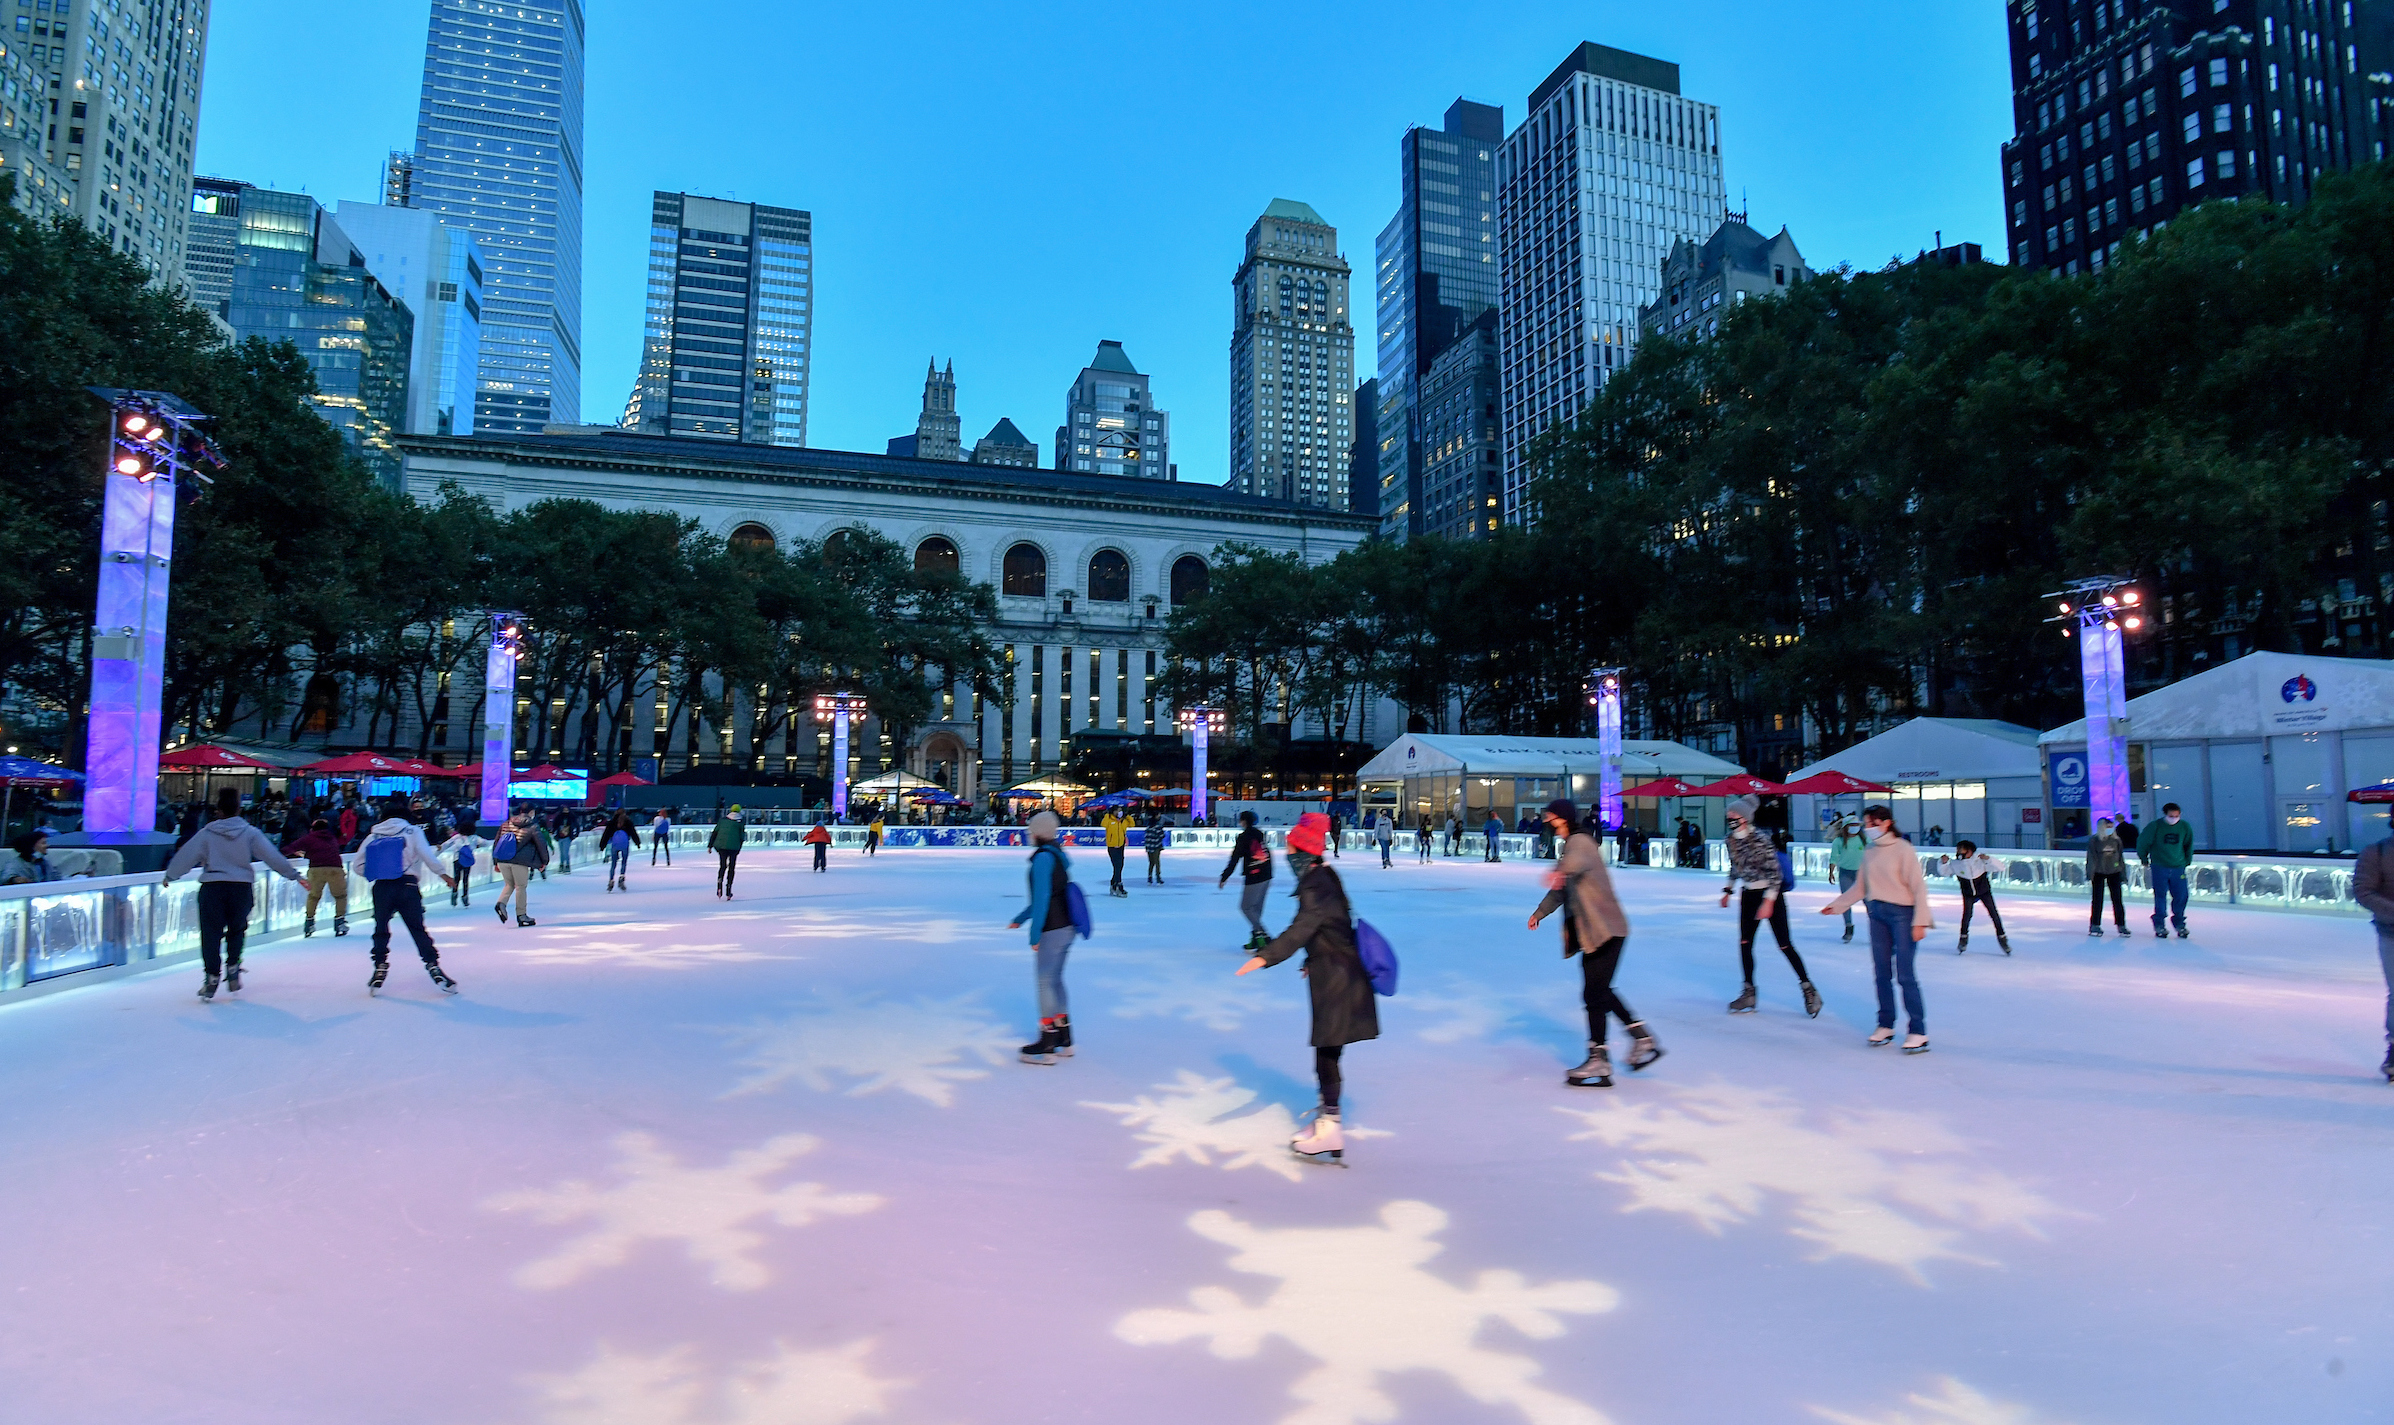 Come to visit us at Bryant Park and enjoy this beautiful place